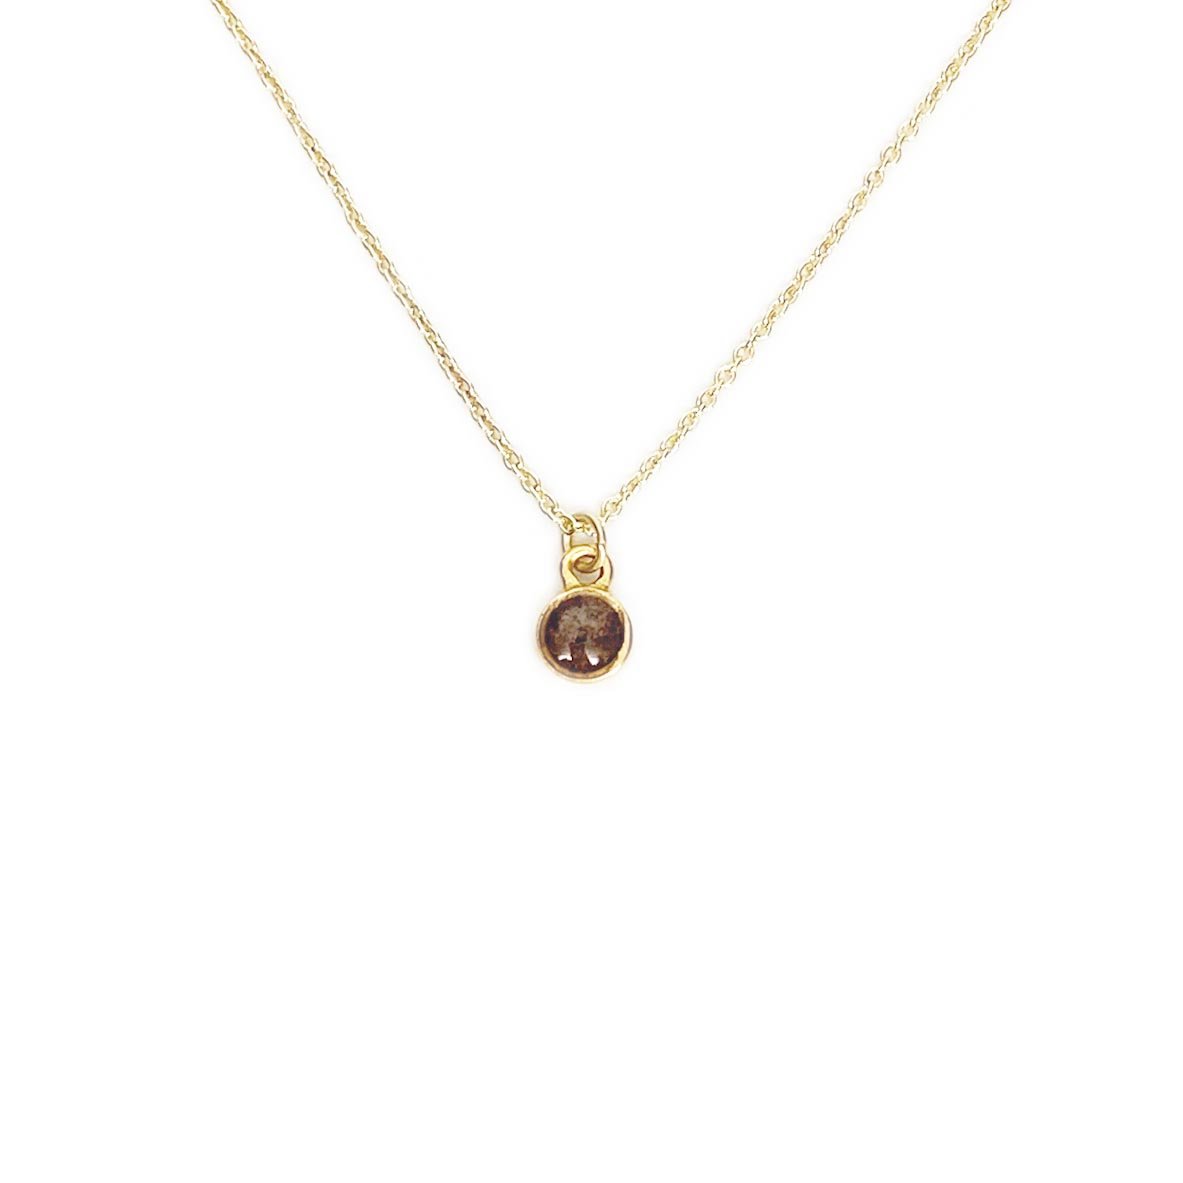 Tiny Charm Necklace in Gold